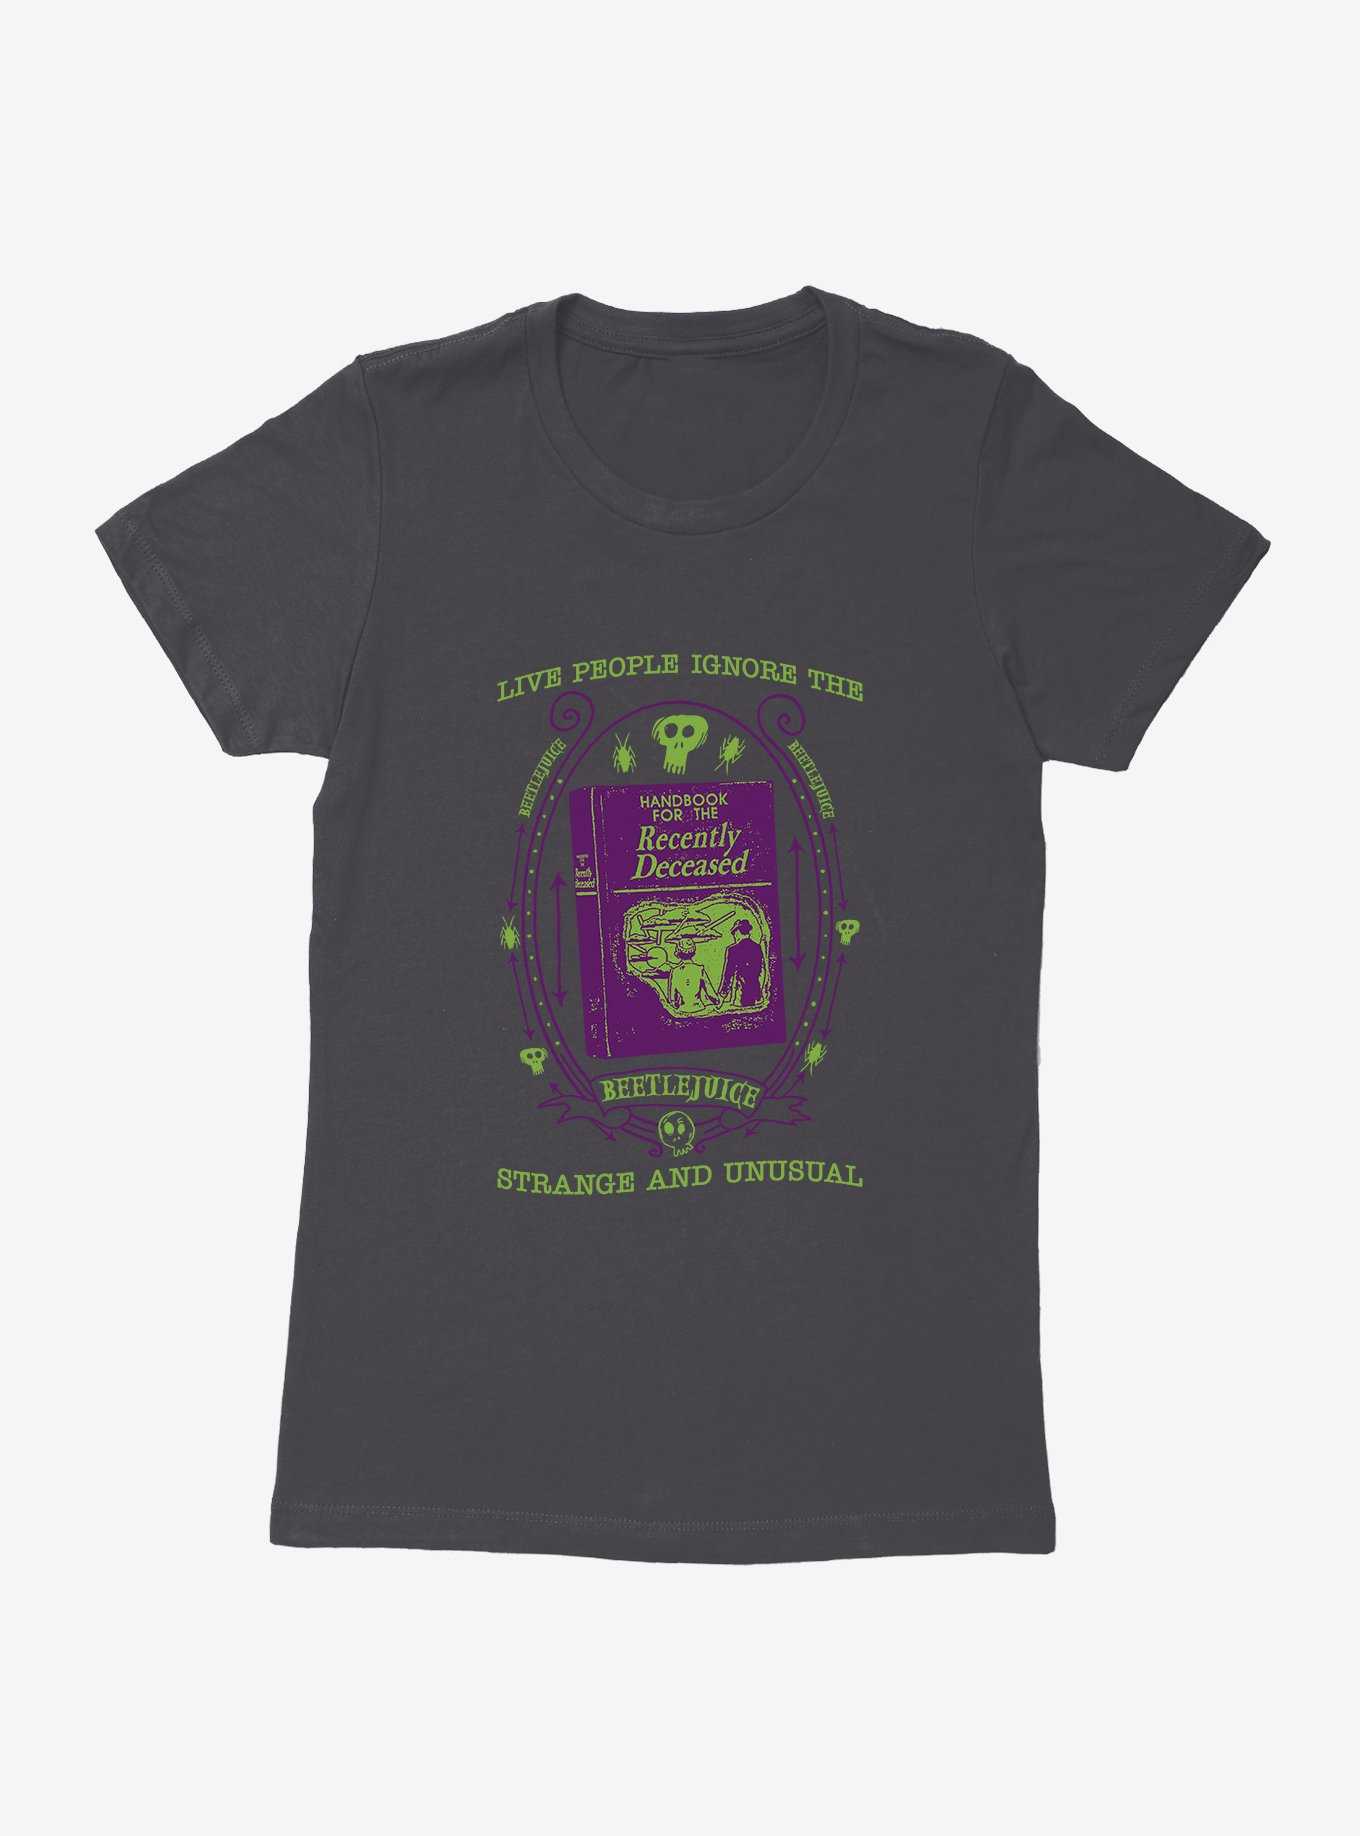 Beetlejuice Live People Ignore The Strange And Unusual Womens T-Shirt, , hi-res